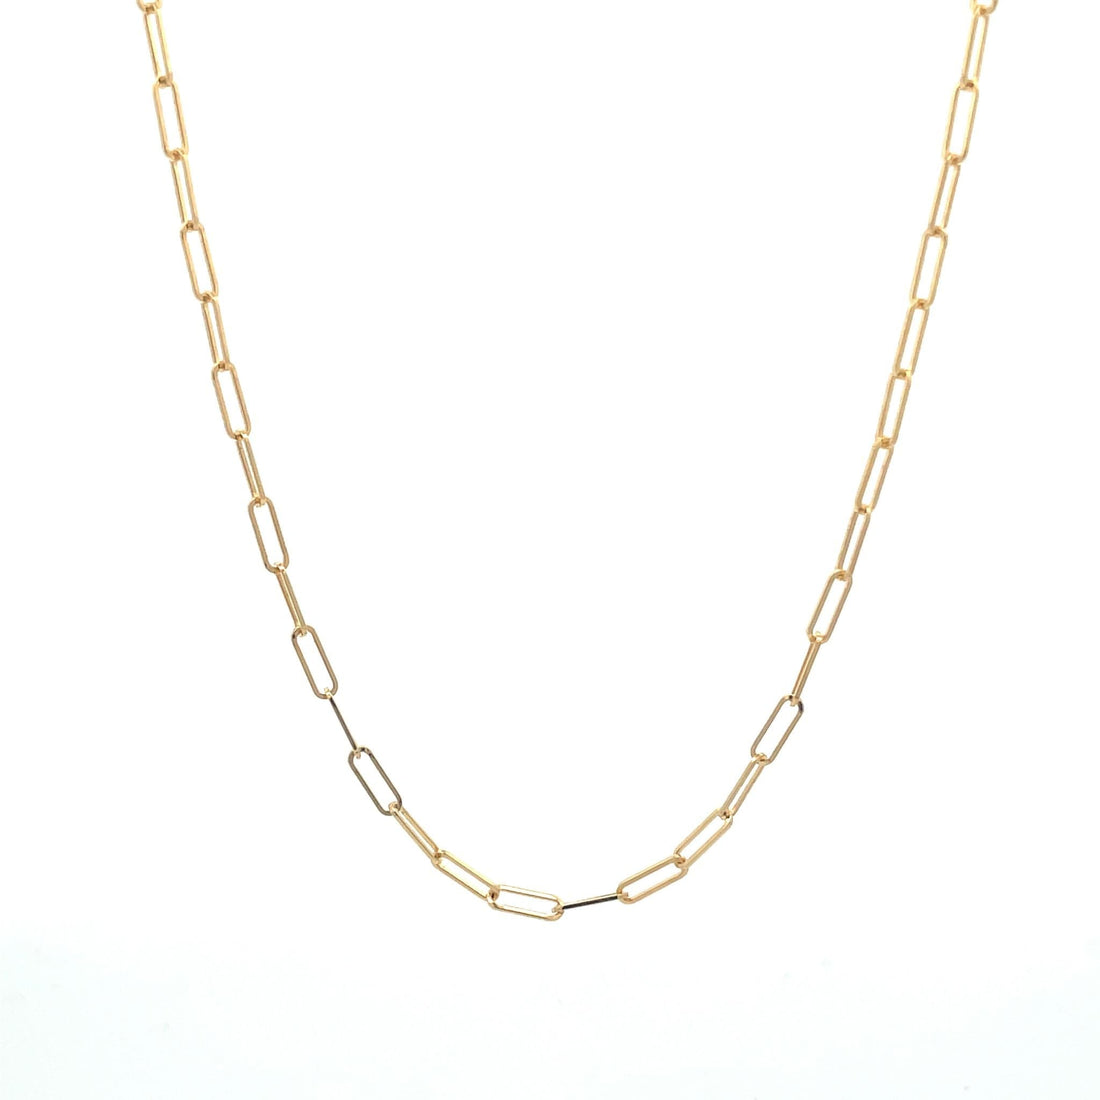 14kt Yellow Gold Paperclip Chain Necklace - Skeie's Jewelers